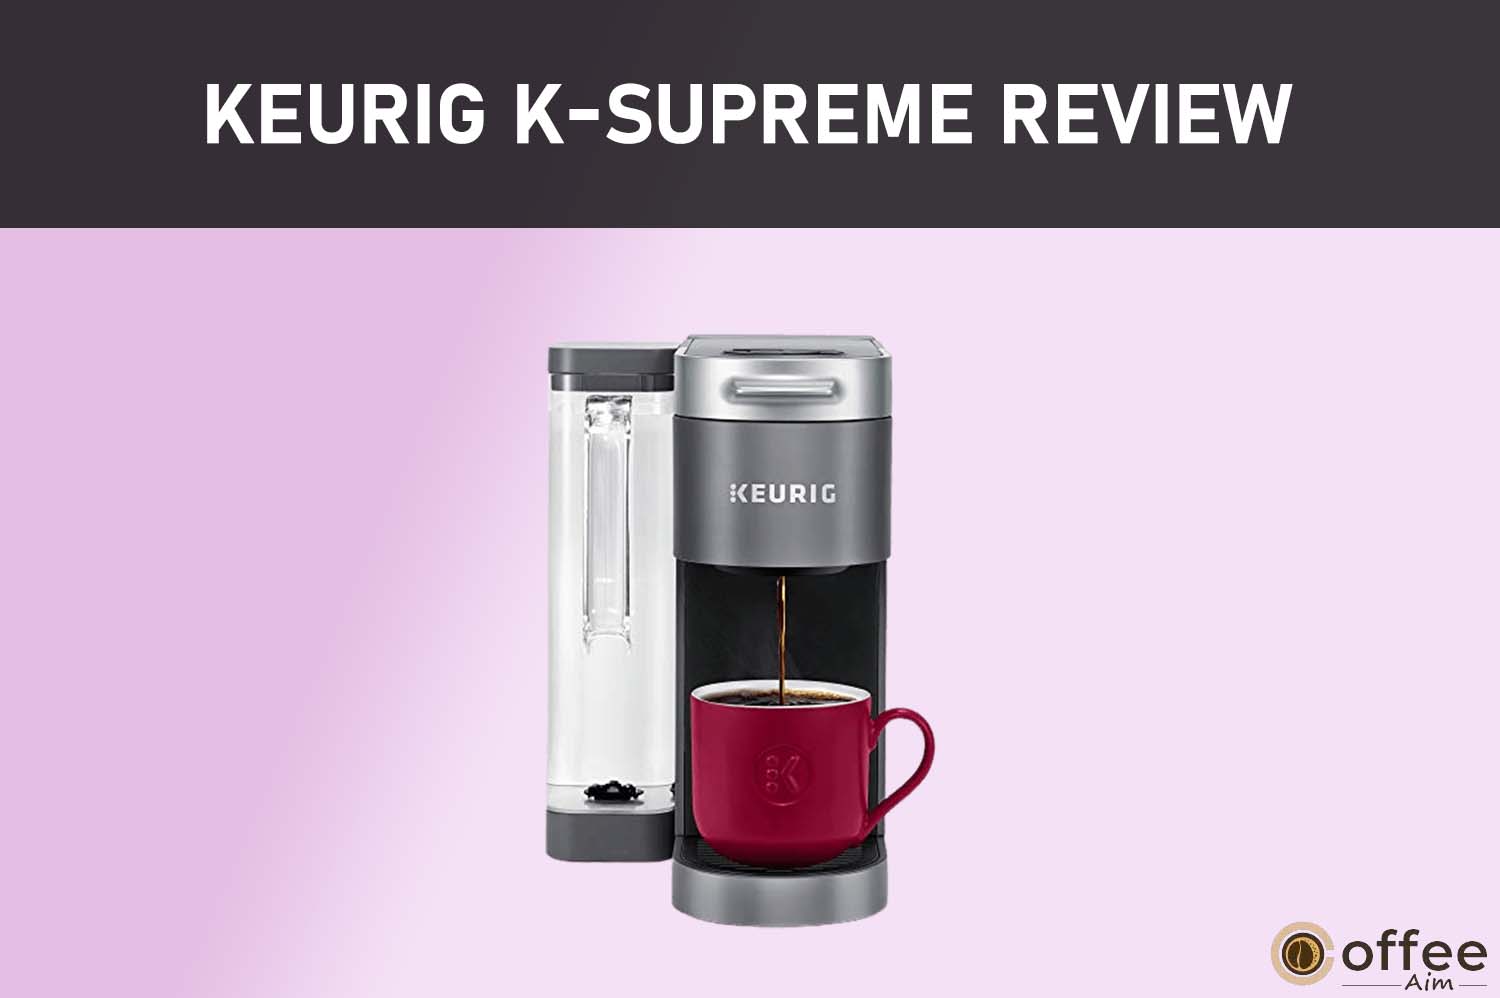 Featured image for the article "Keurig K-Supreme Review"